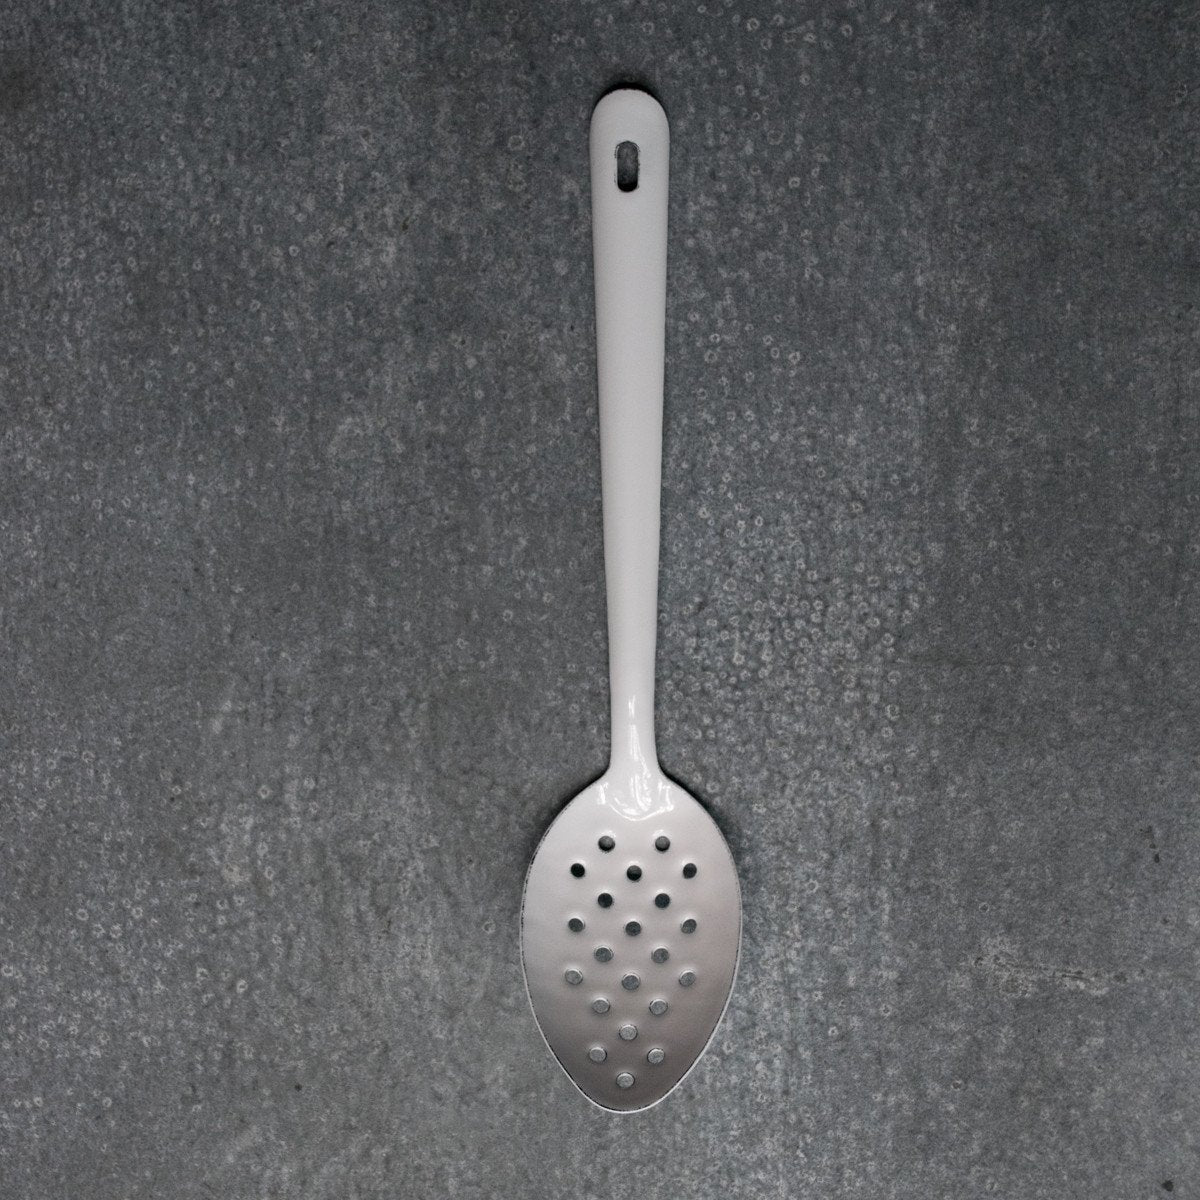 Falcon Enamel Perforated Slotted Spoon